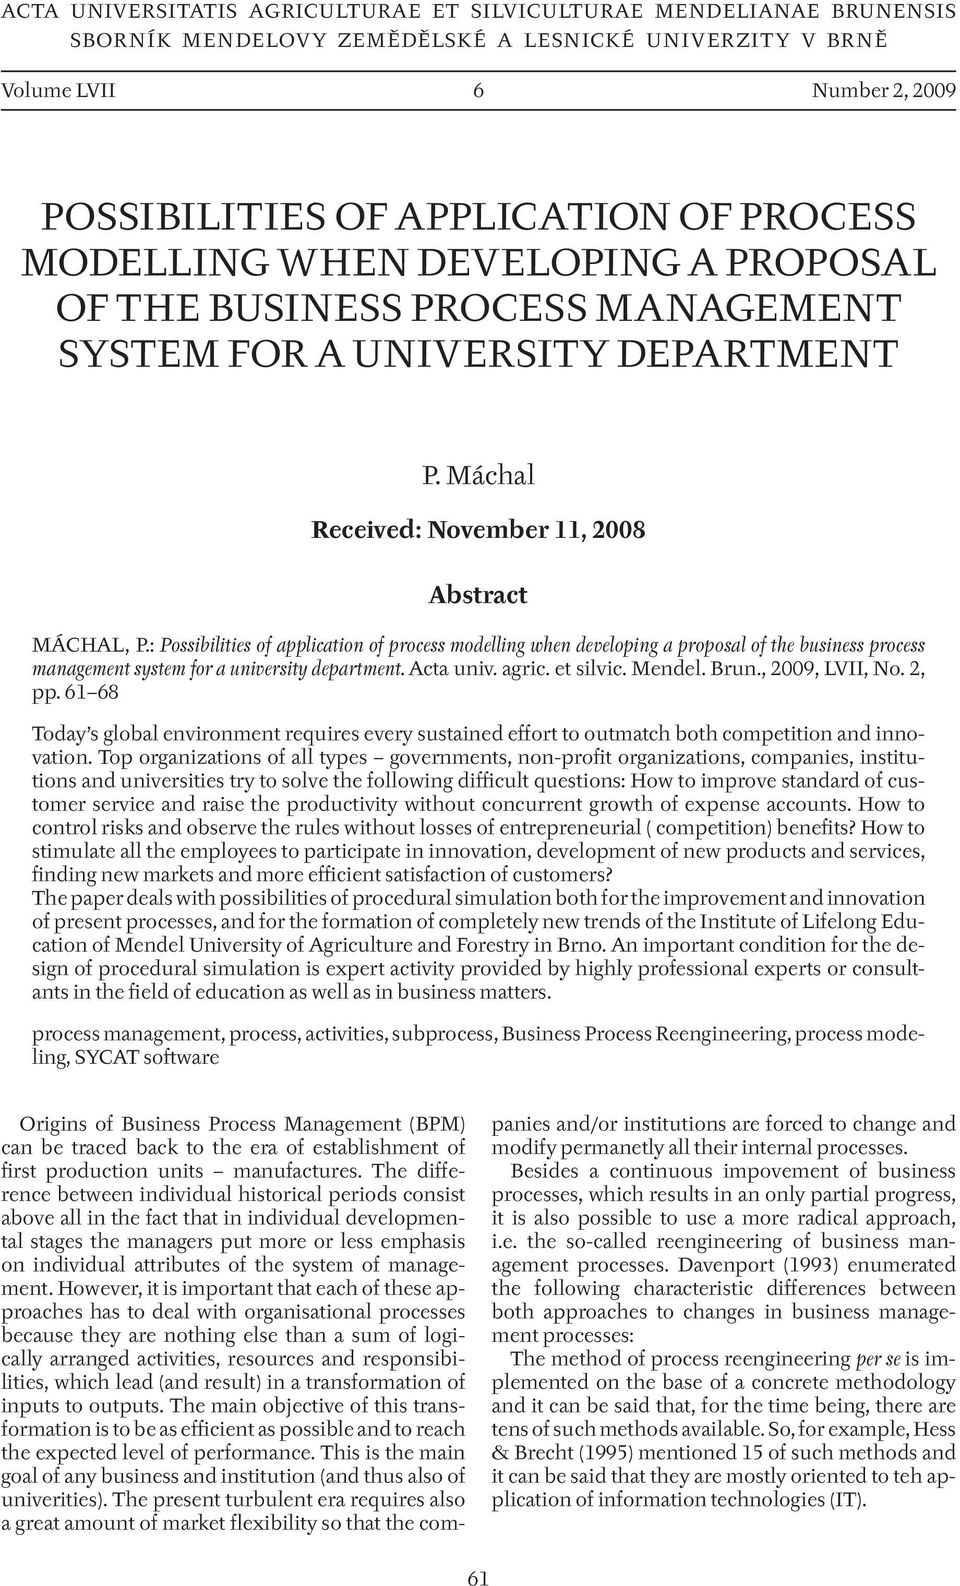 : Possibilities of application of process modelling when developing a proposal of the business process management system for a university department. Acta univ. agric. et silvic. Mendel. Brun.